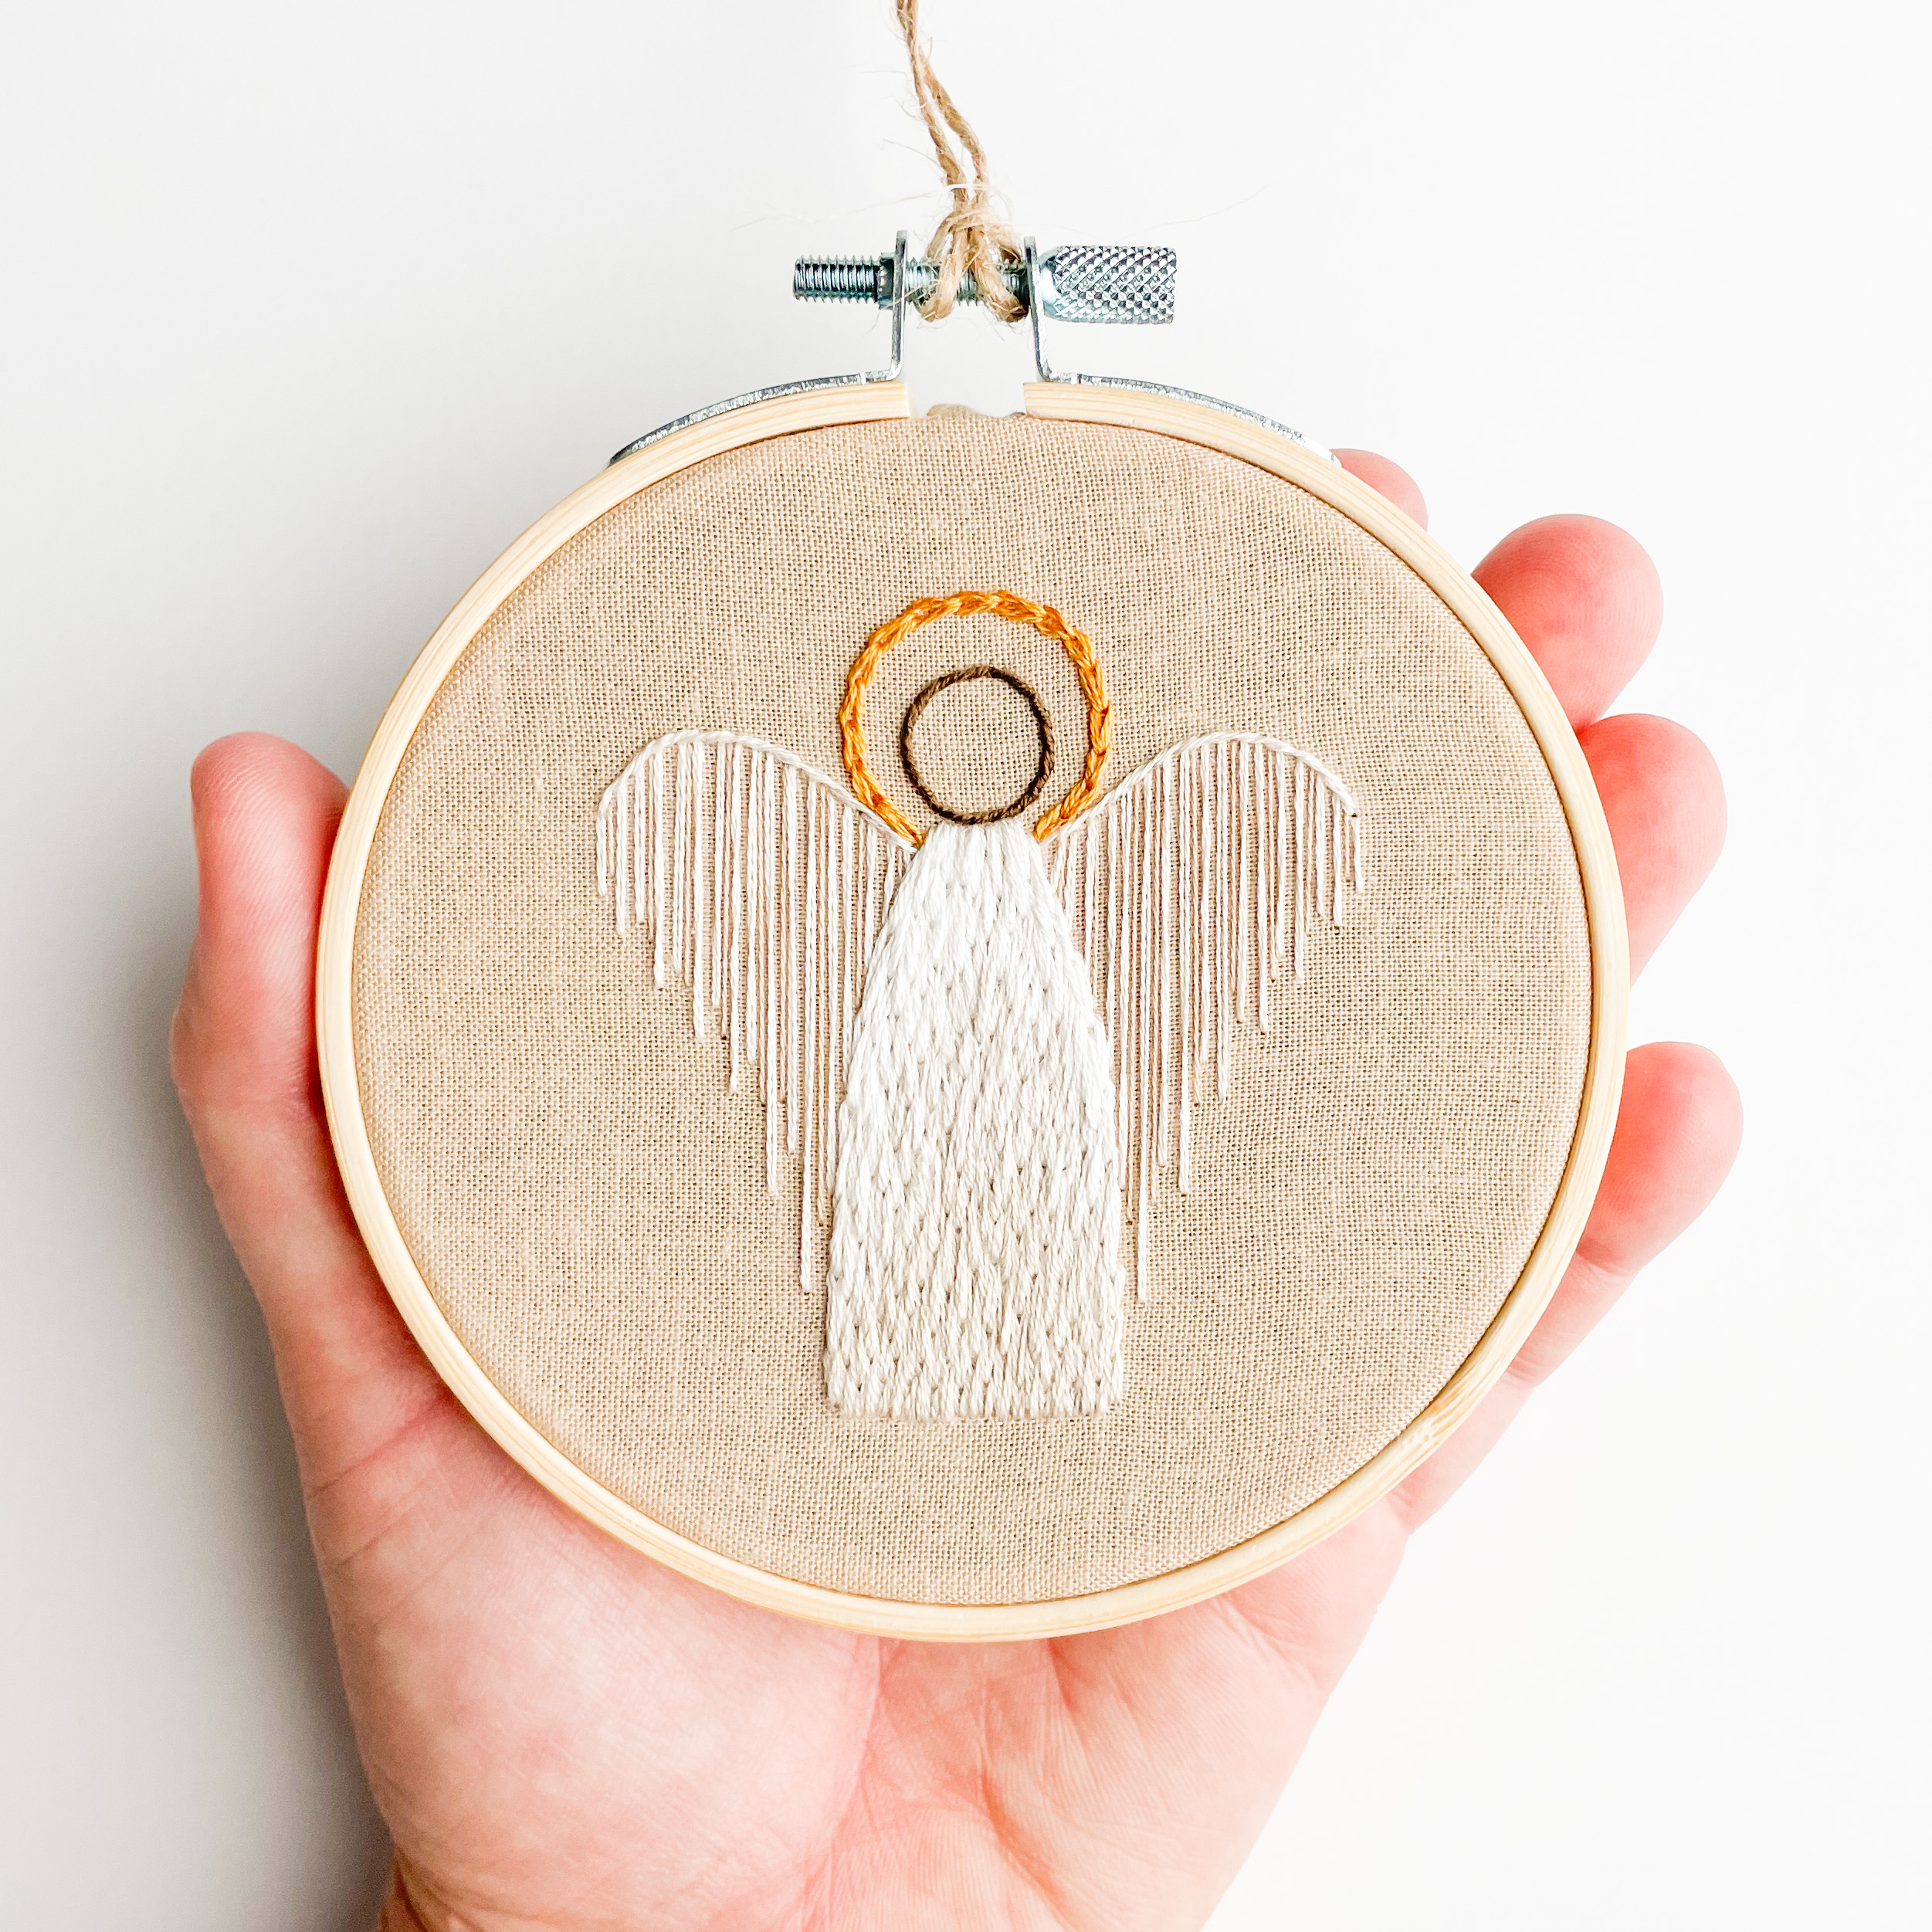 Image of a hand holding a small embroidery hoop with and image of an angel with a halo stitched on it.